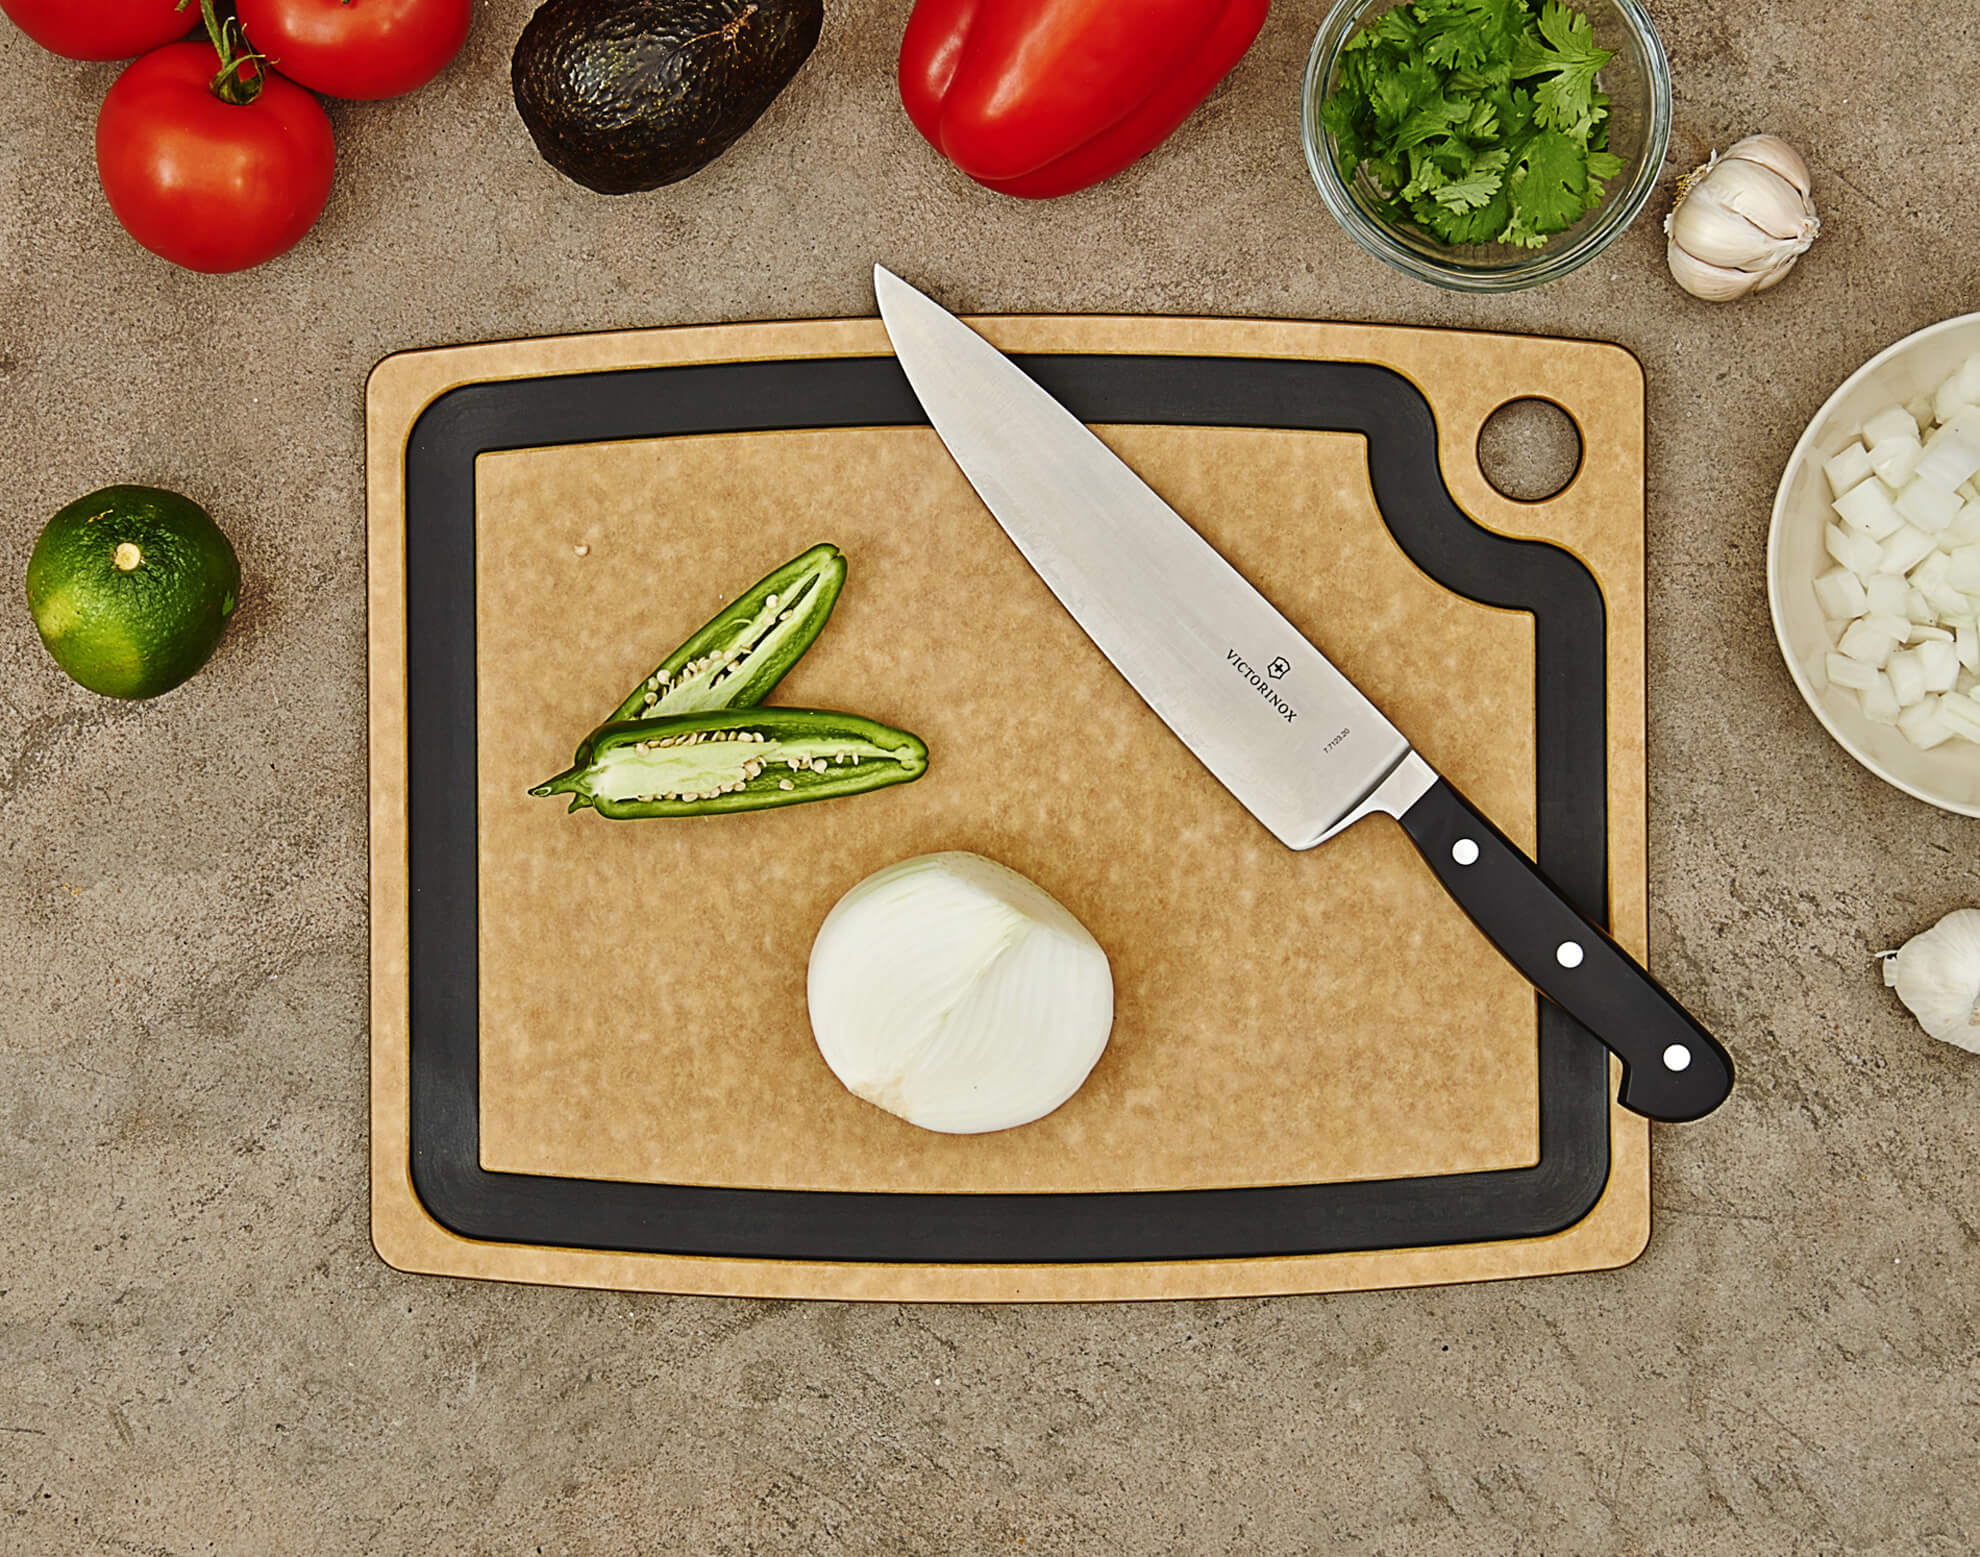 https://images.electronicexpress.com/misc.c/brand-epicurean-cutting-boards-ls-2.jpg